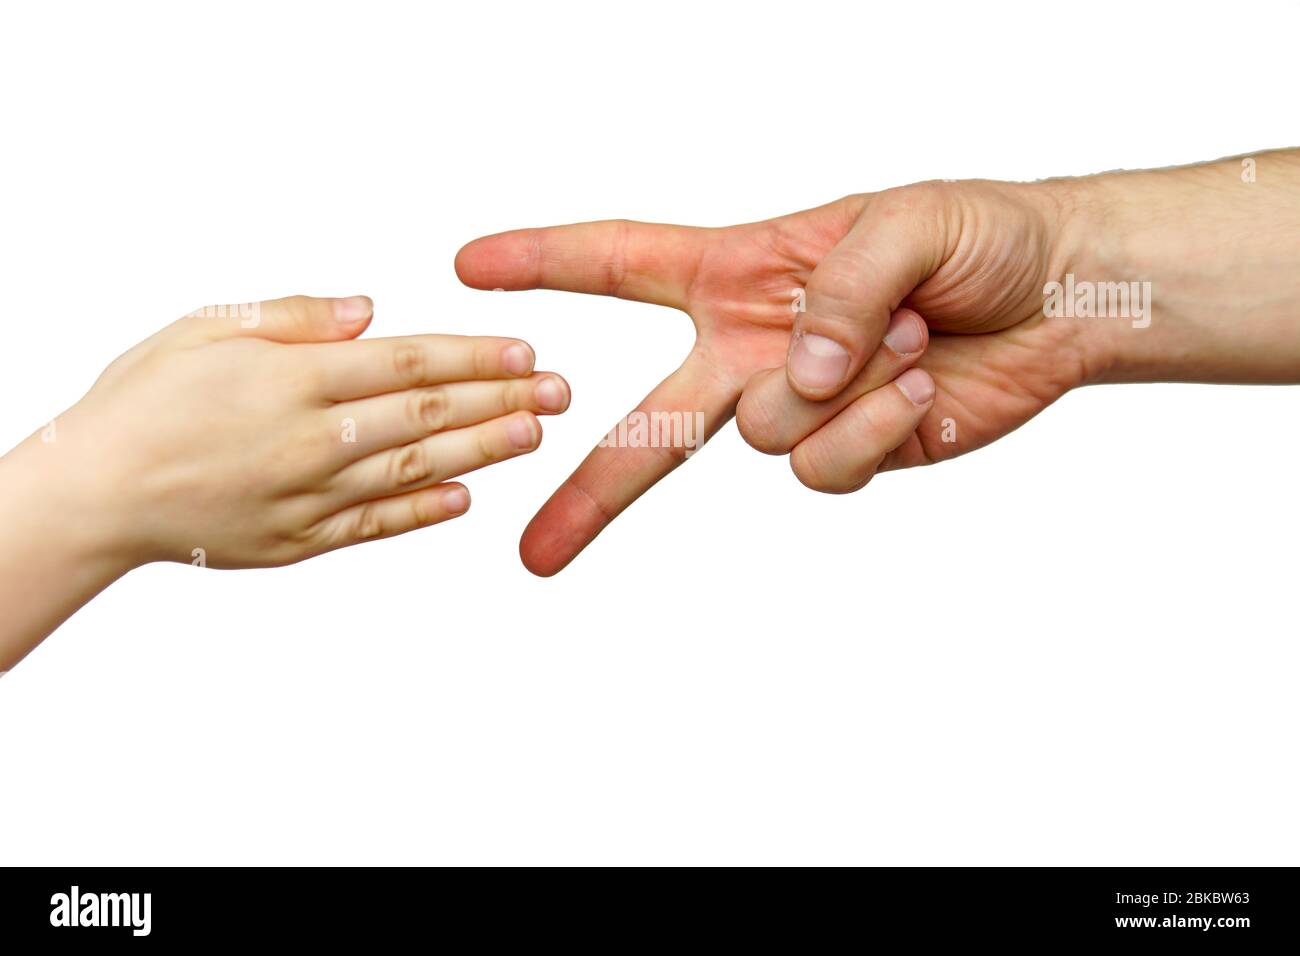 hand paper and scissors play together on a white isolated background Stock Photo